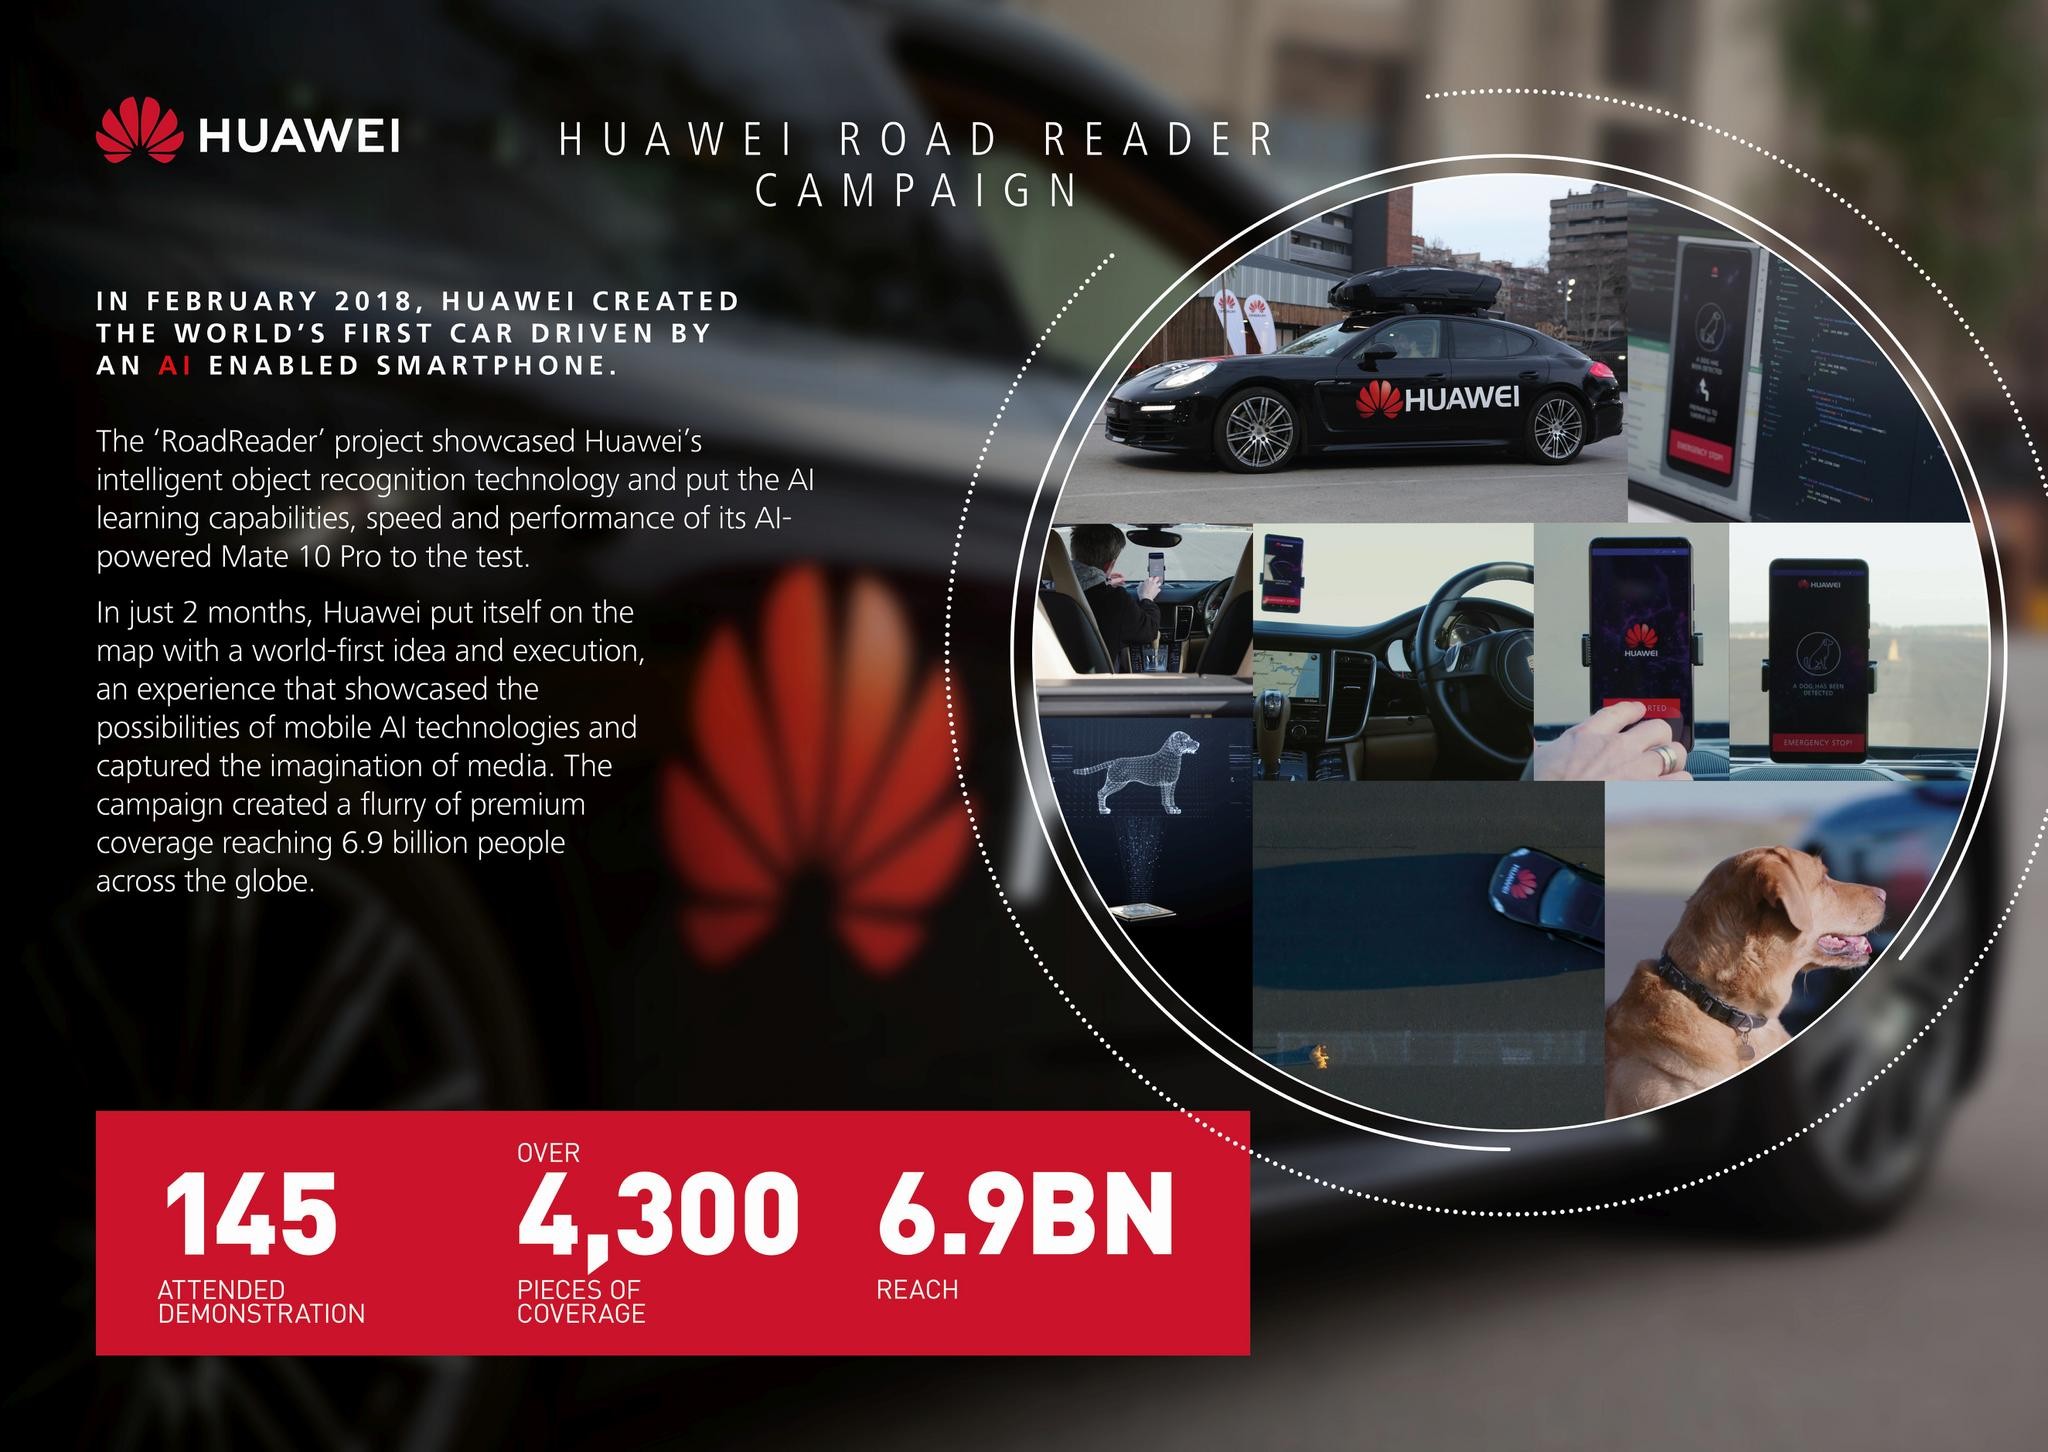 Huawei Road Reader Campaign